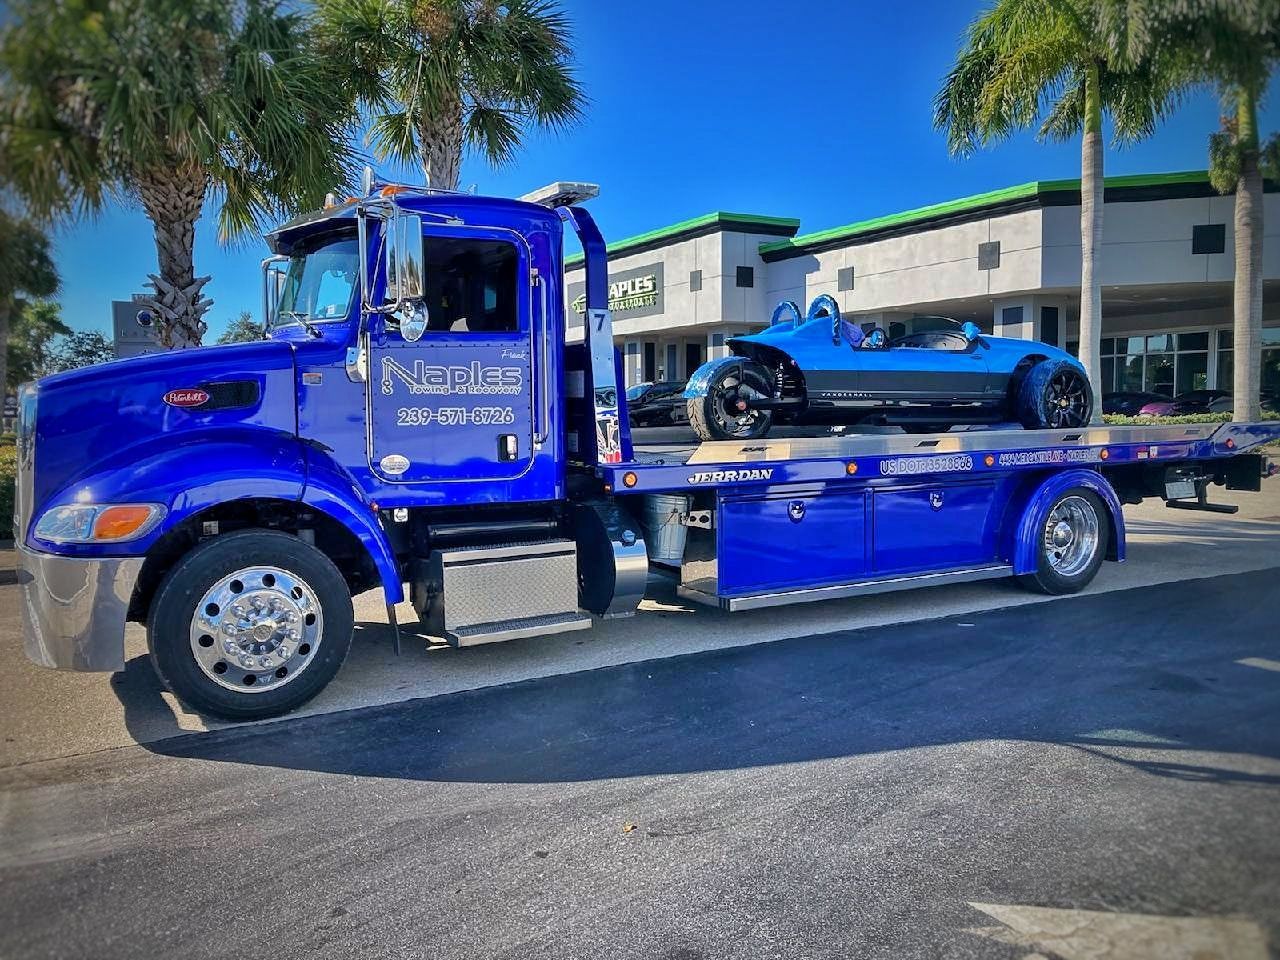 Reliable towing services in Marco Island, FL provided by Naples Towing and Recovery.